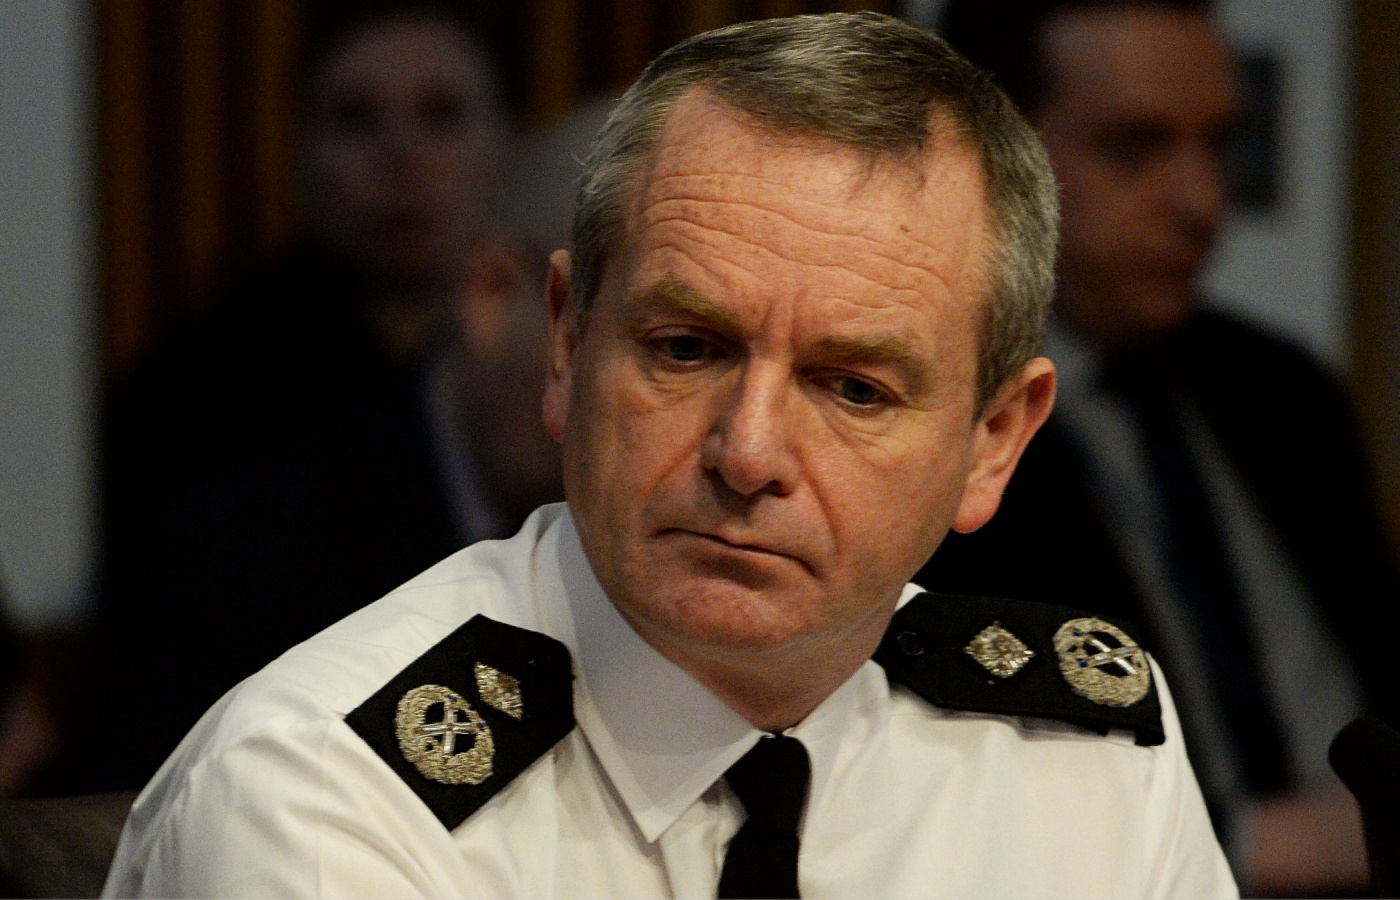 Former Police Scotland chief constable Iain Livingstone said the sooner the SNP probe is over the better.